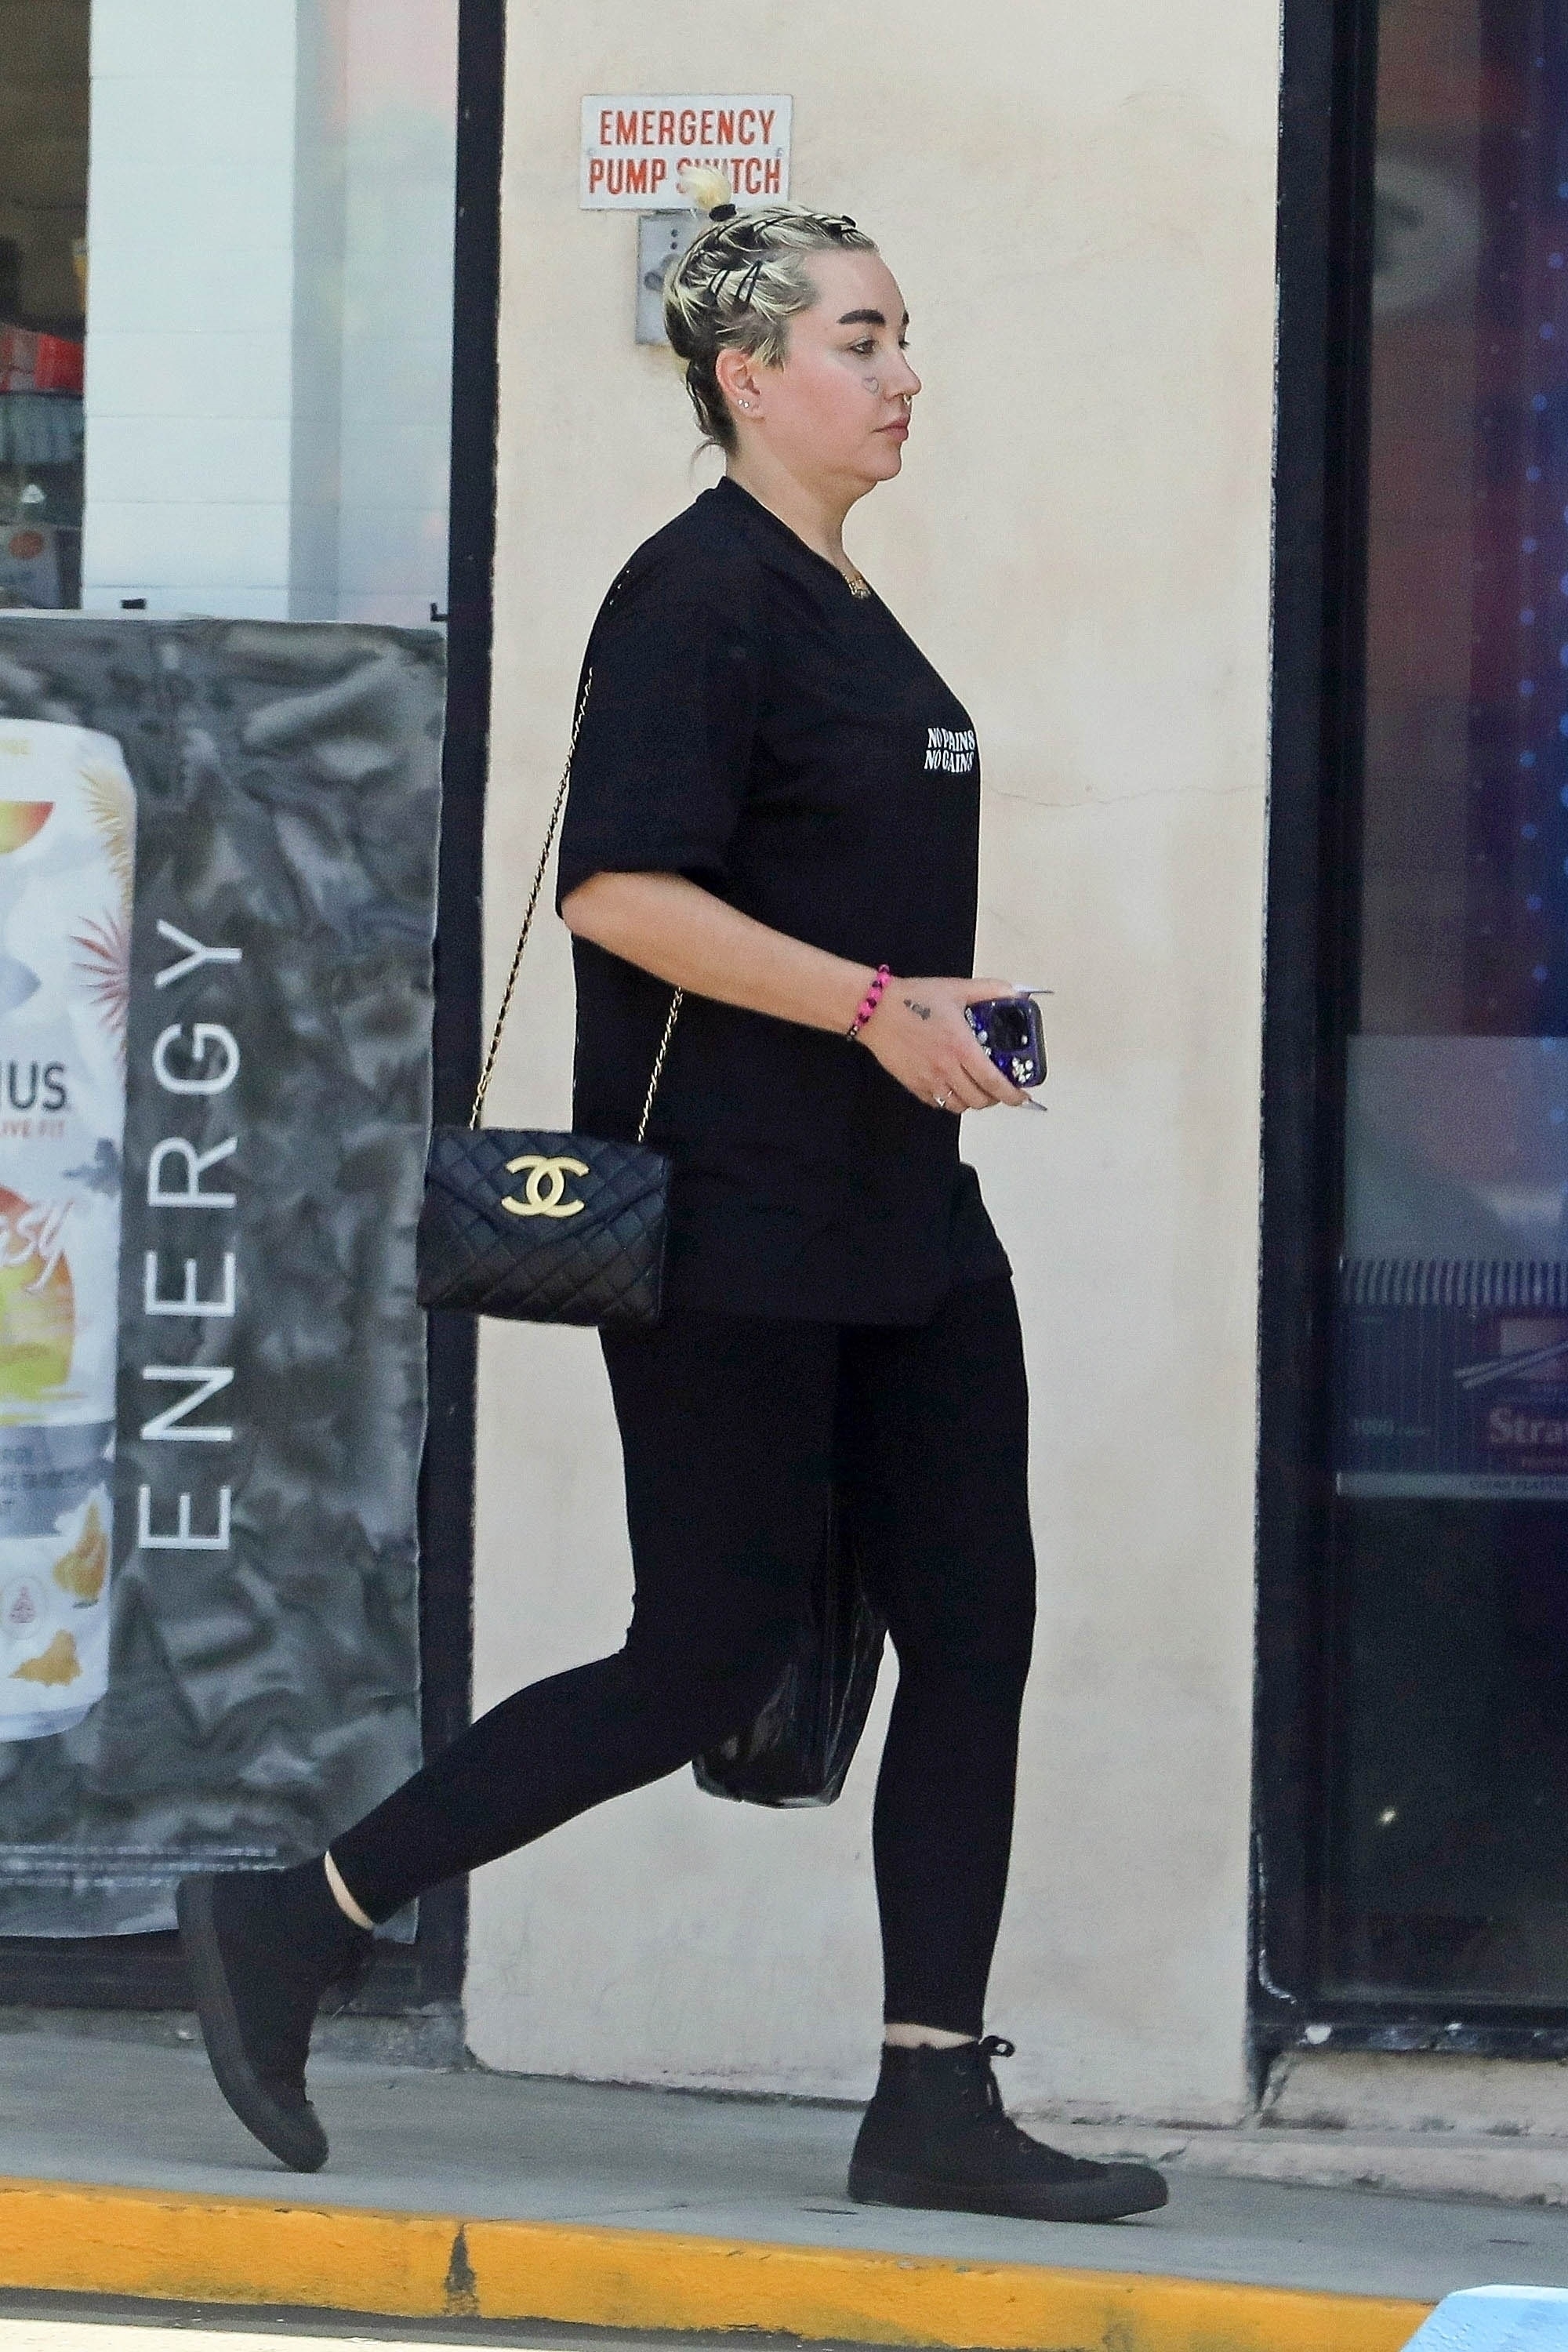 The former Nickelodeon child star looked unbothered as she rocked an oversized black T-shirt and leggings